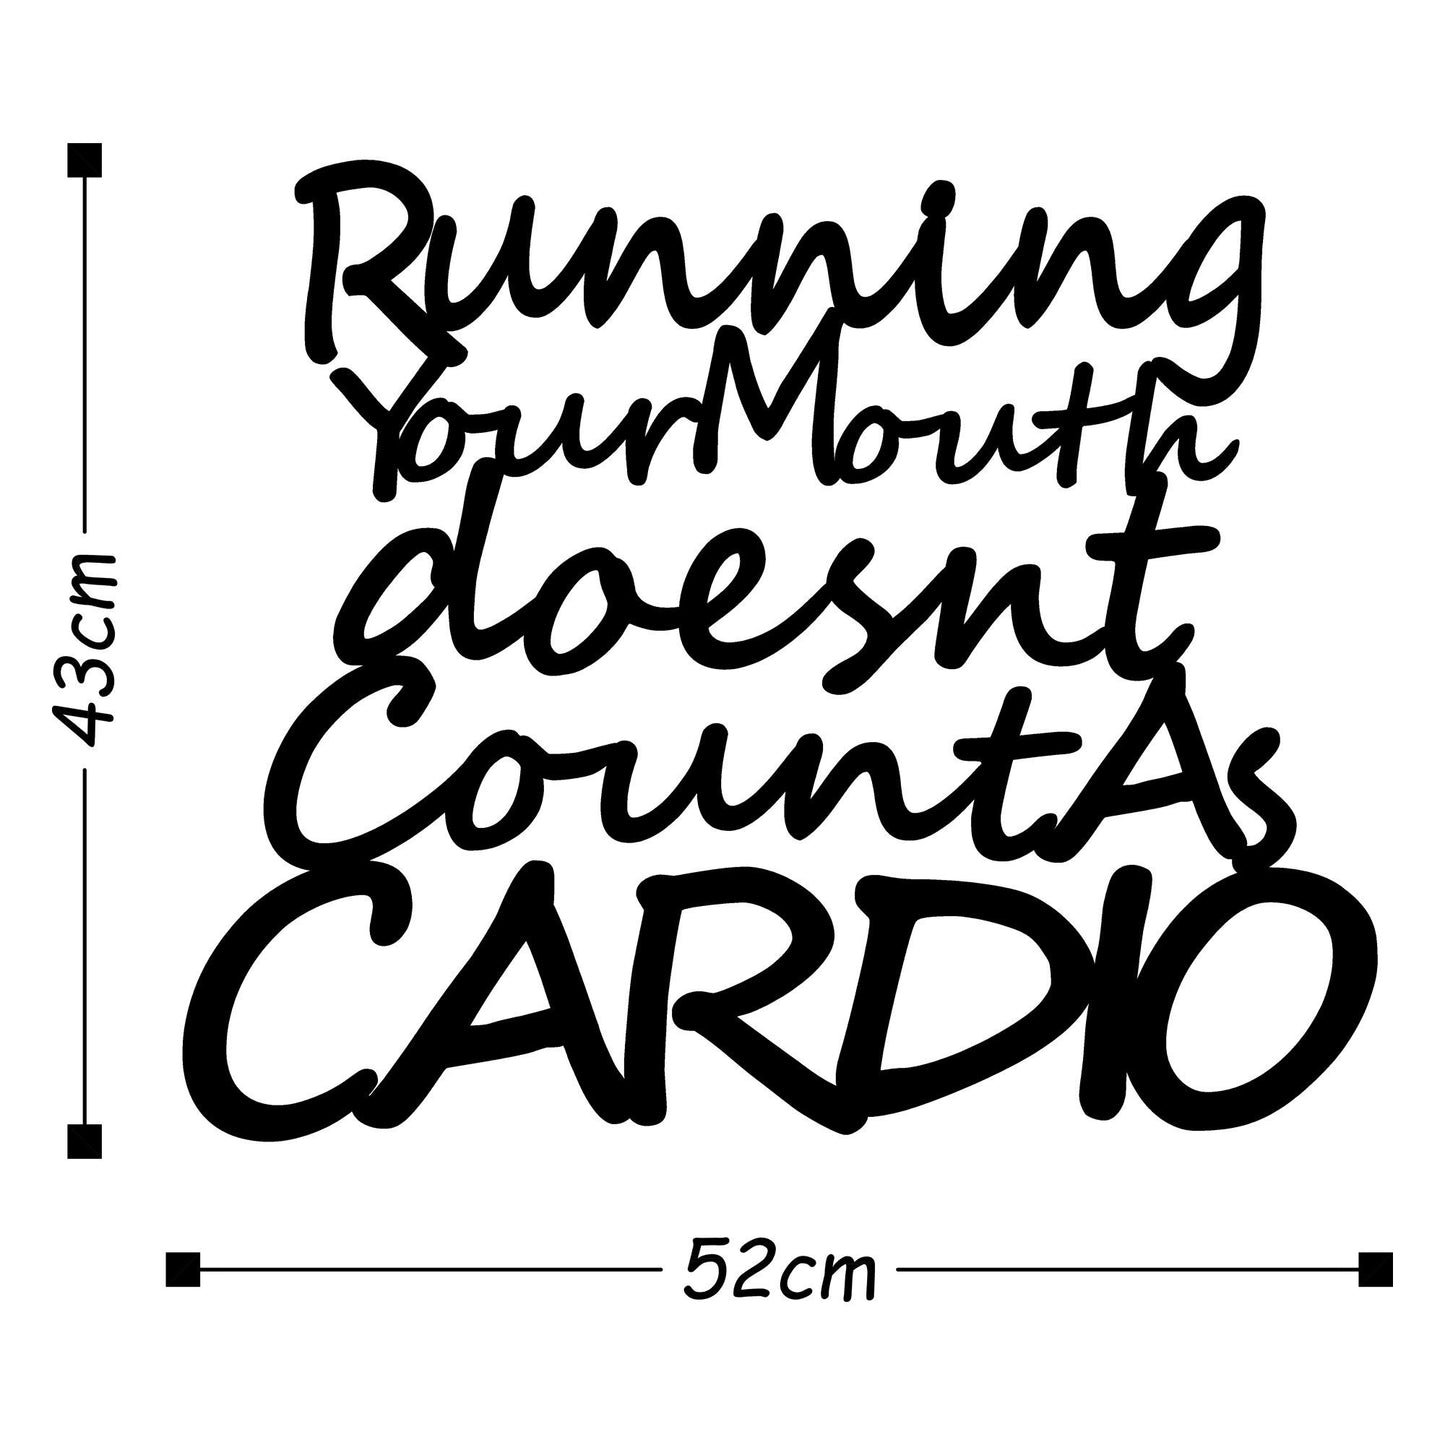 Running Your Mouth Doesnt Countas Cardio - Decorative Metal Wall Accessory